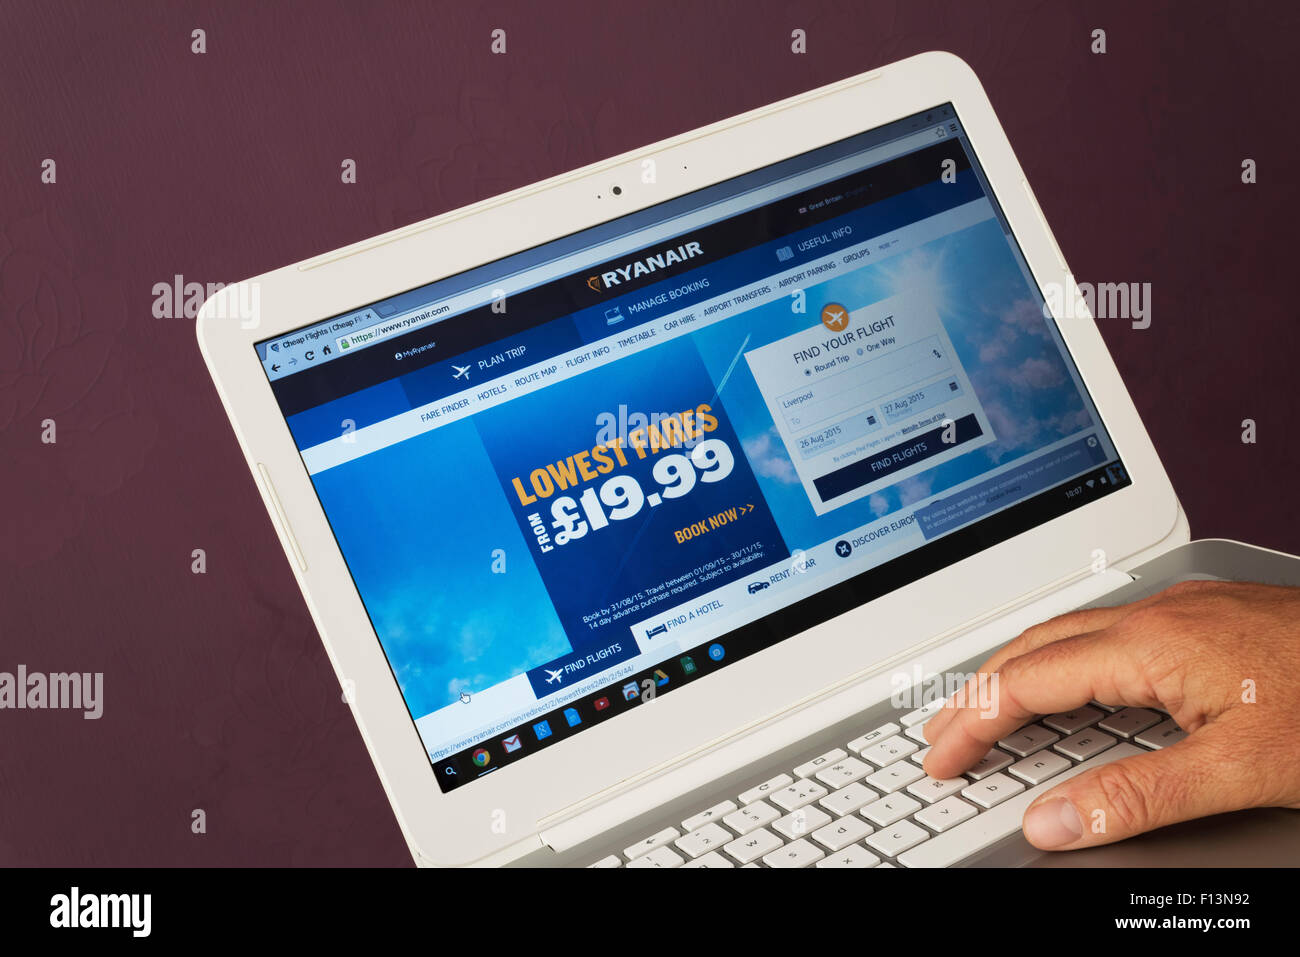 Website belonging to Ryan Air being viewed on a laptop computer Stock Photo